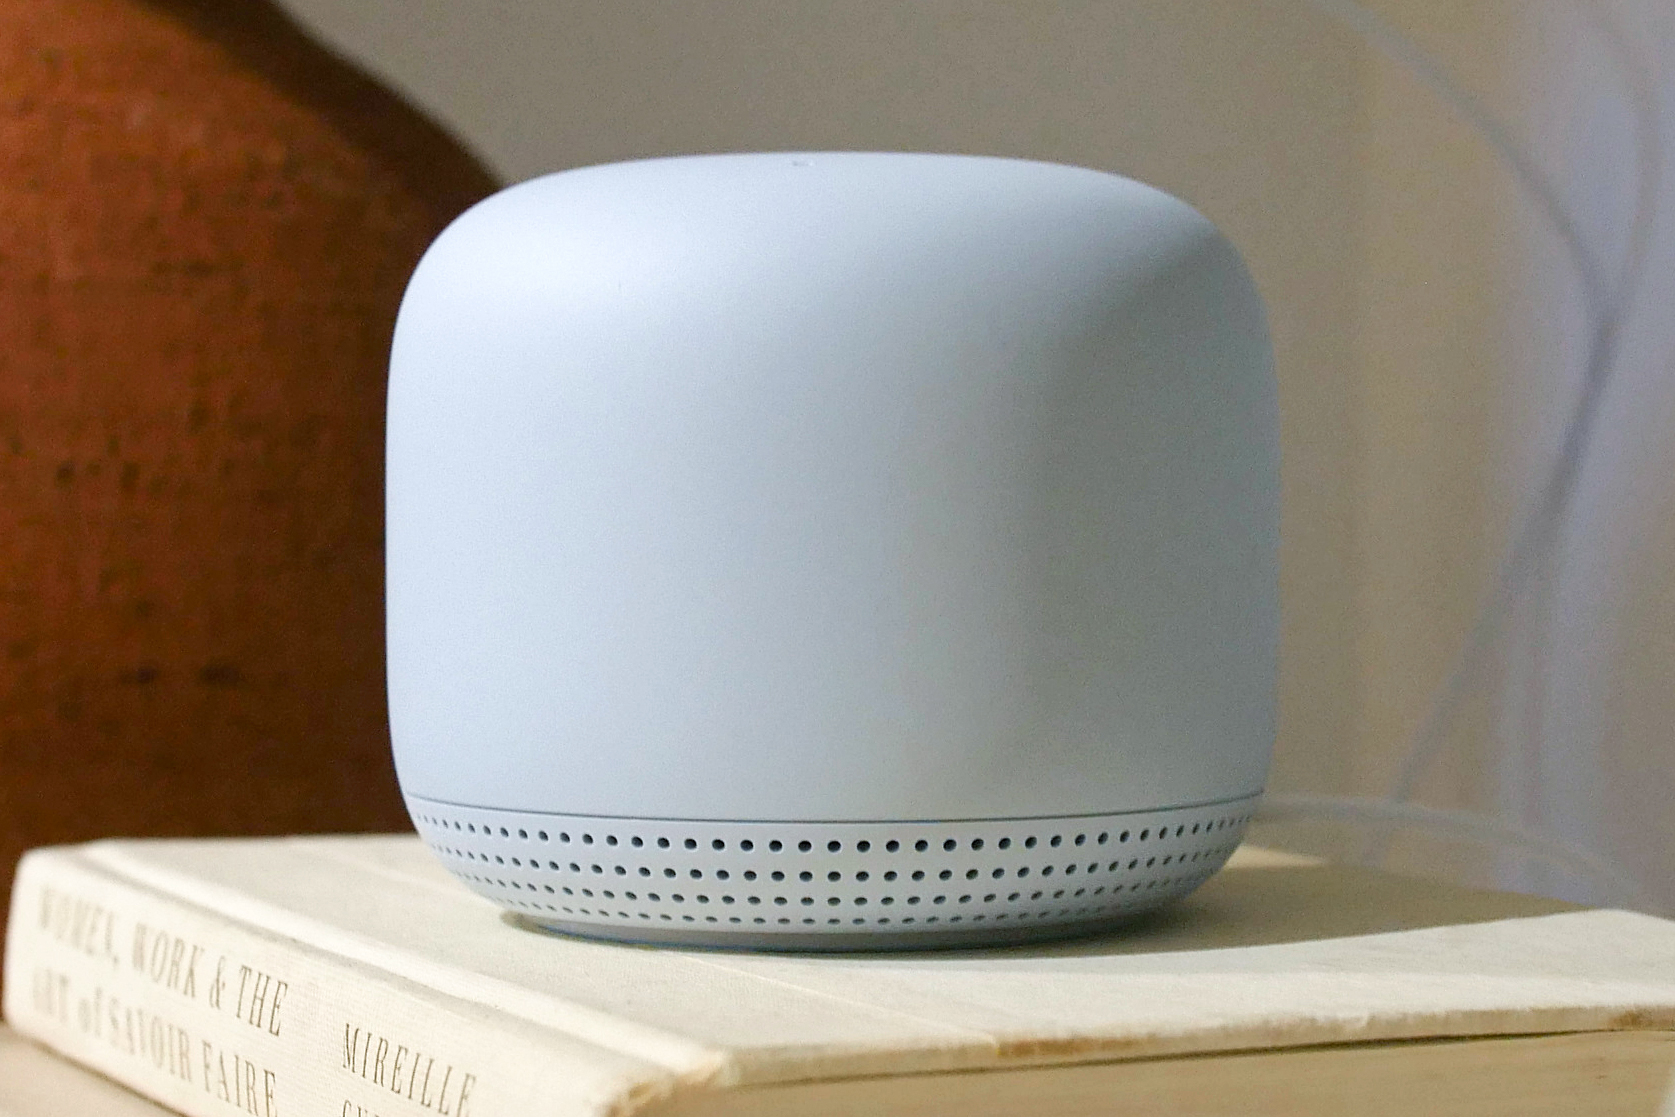 The Google Nest Wifi router on a table.